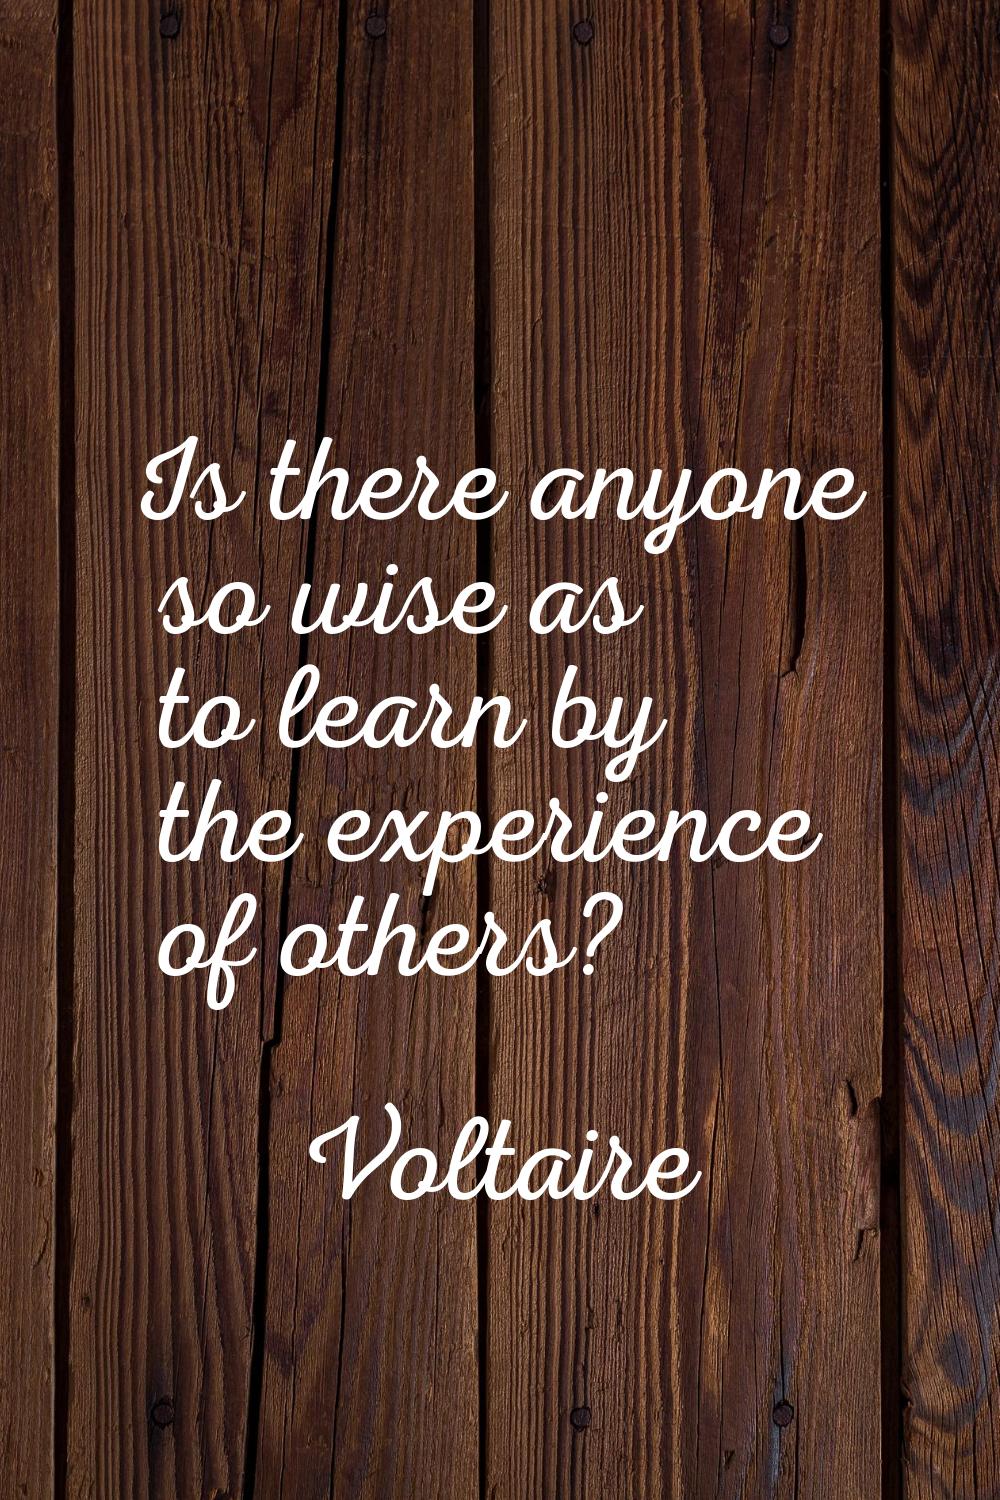 Is there anyone so wise as to learn by the experience of others?